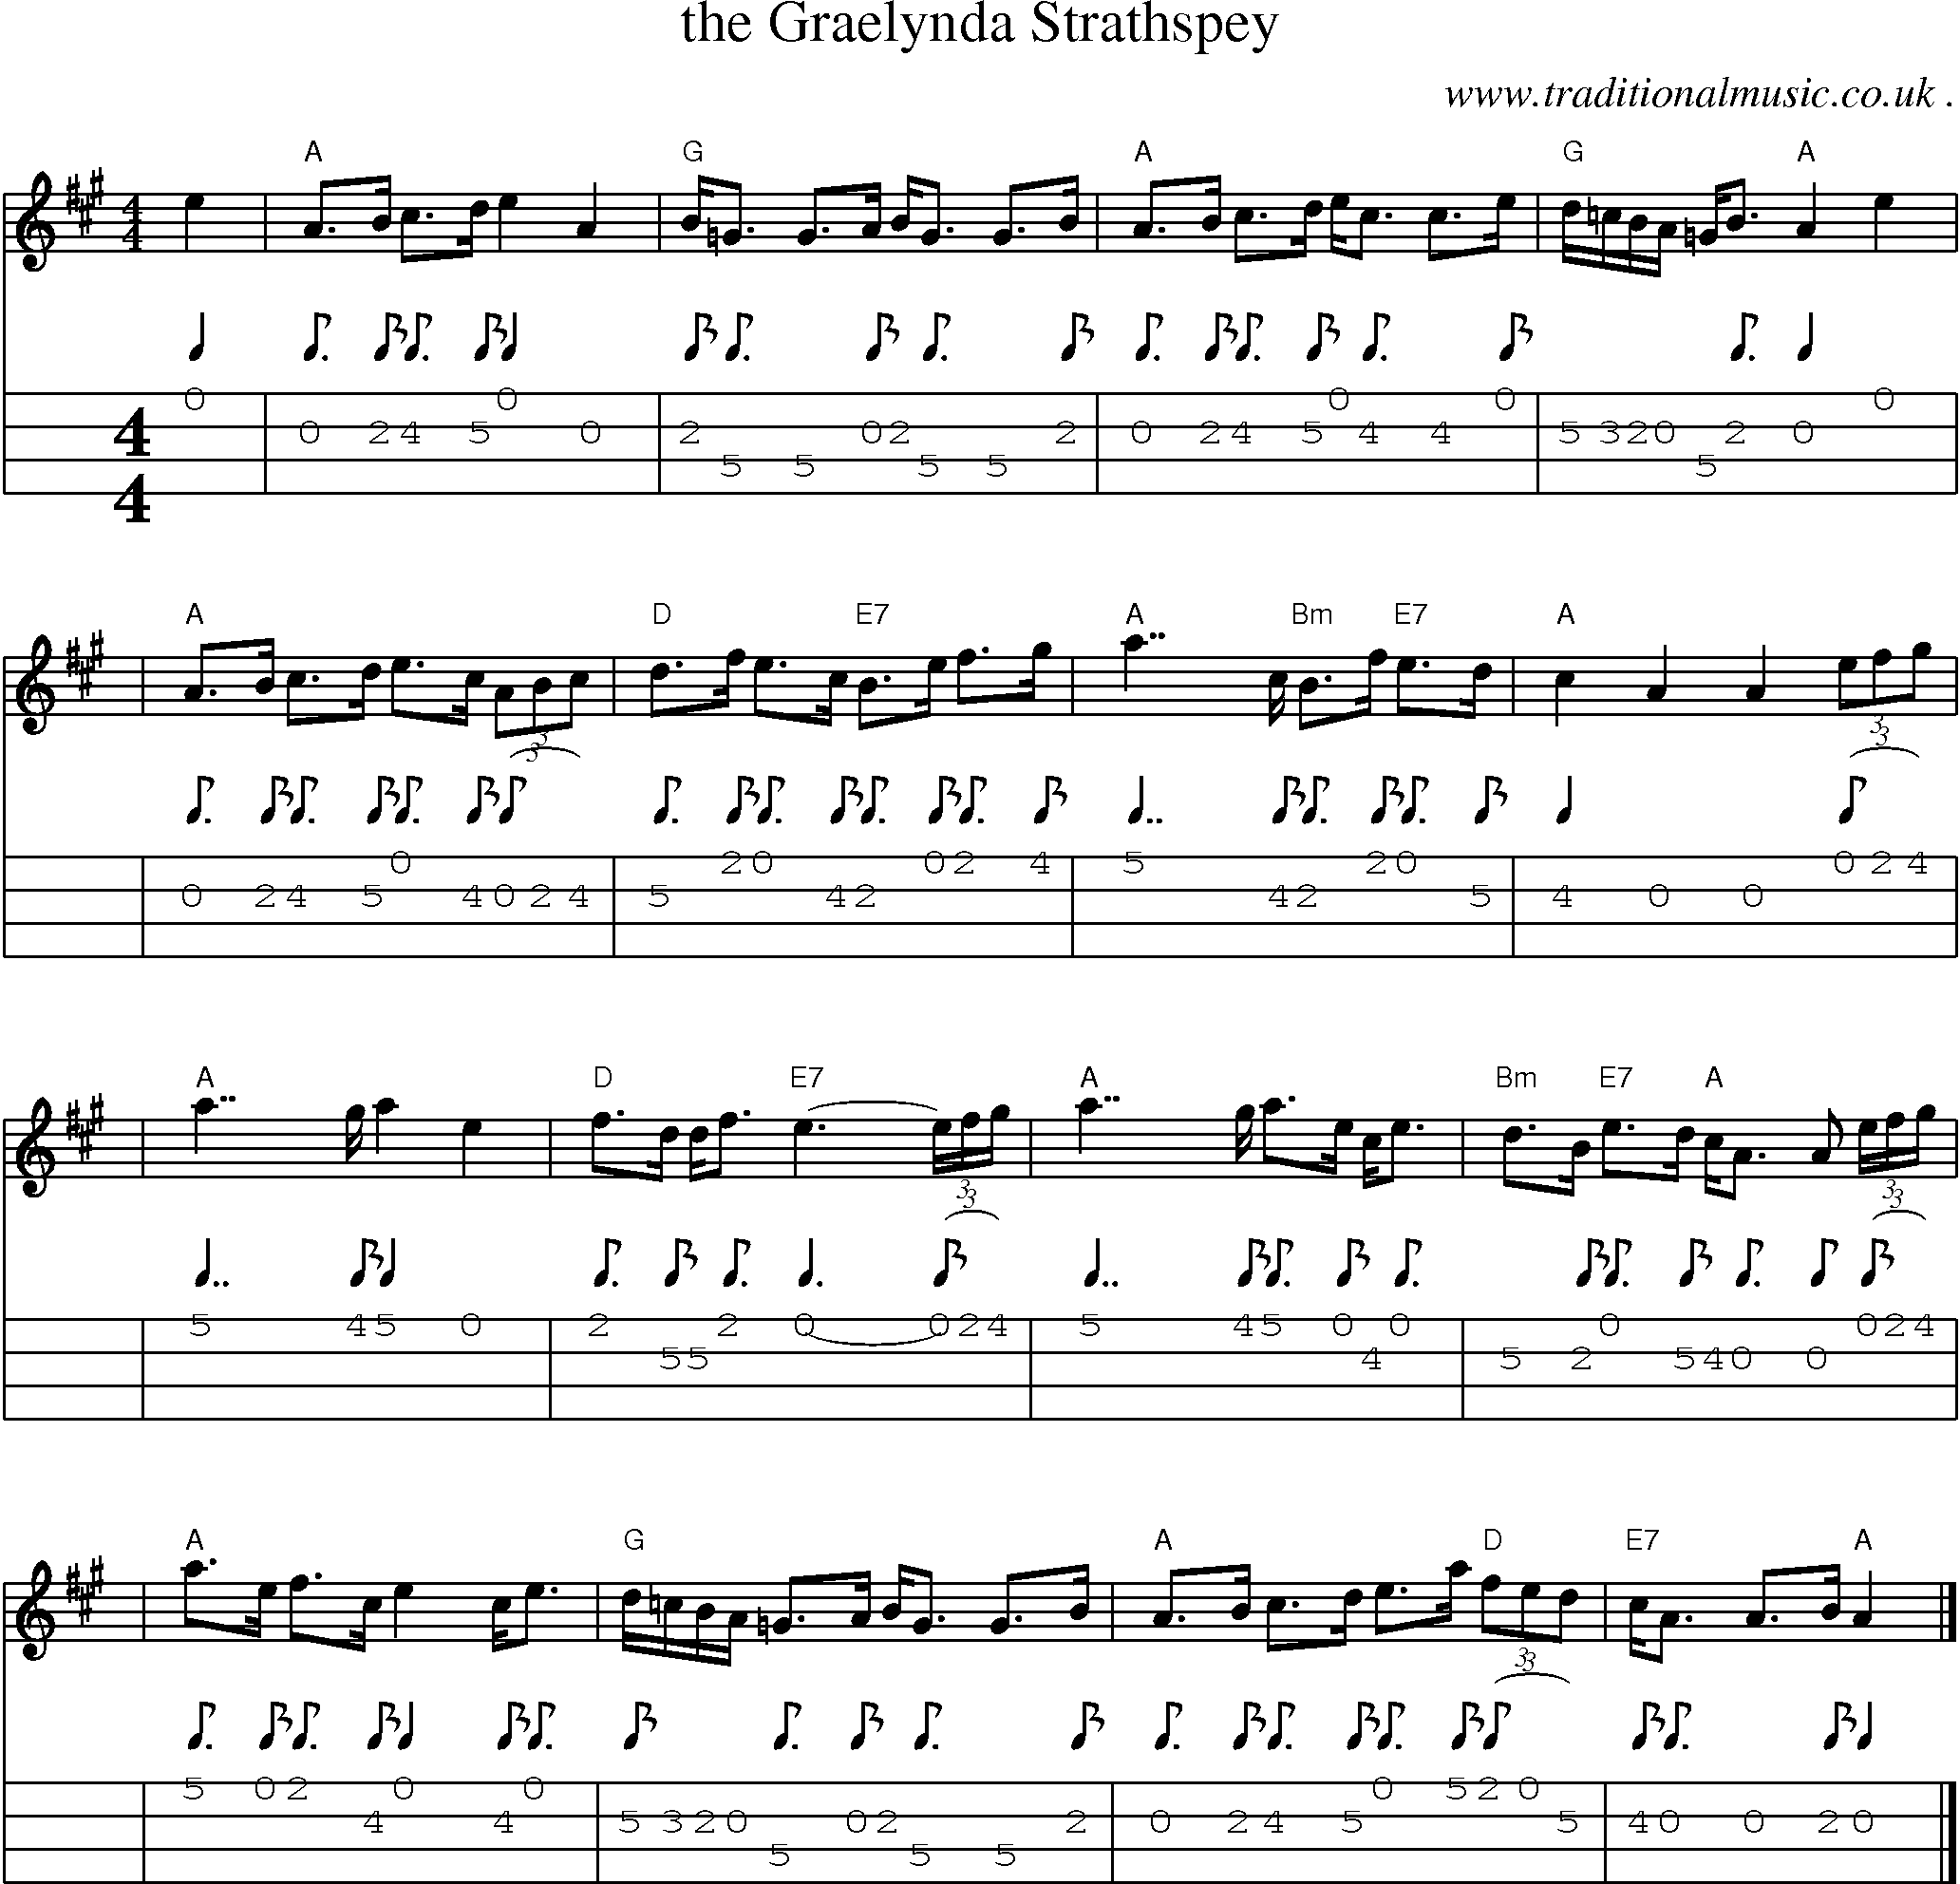 Sheet-music  score, Chords and Mandolin Tabs for The Graelynda Strathspey